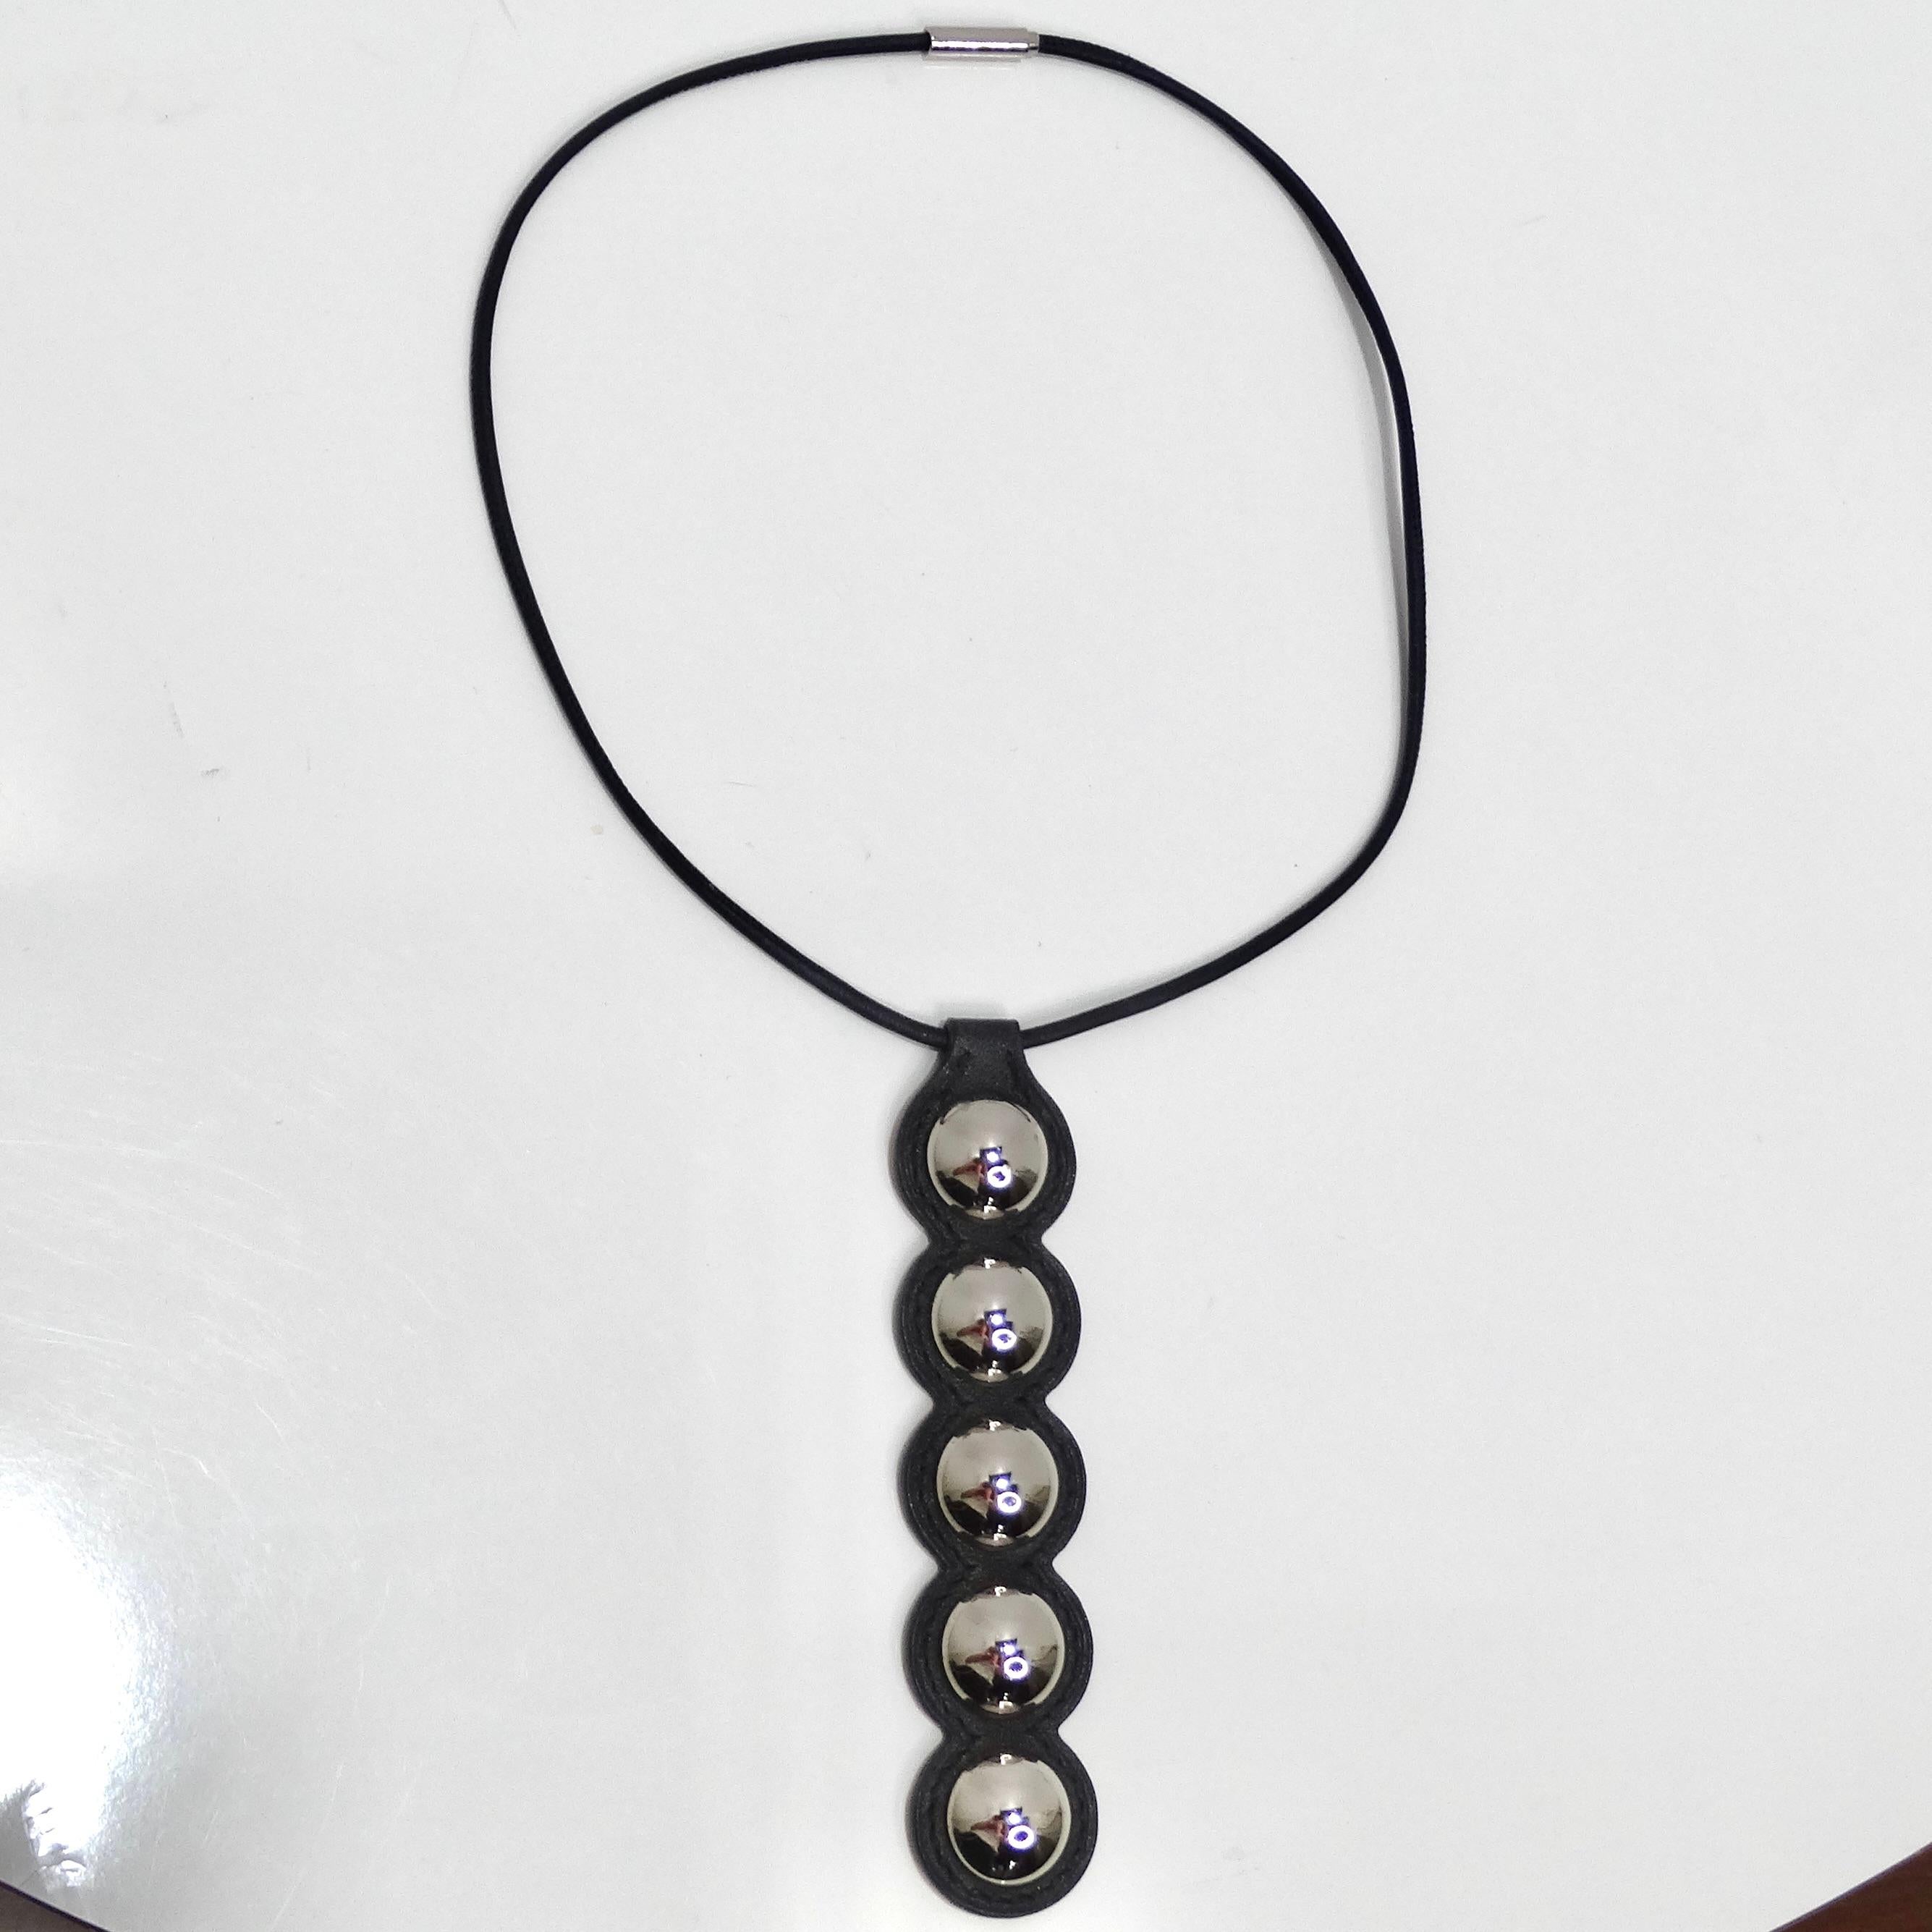 Hermes Passage Cloute Pendent Necklace In Excellent Condition For Sale In Scottsdale, AZ